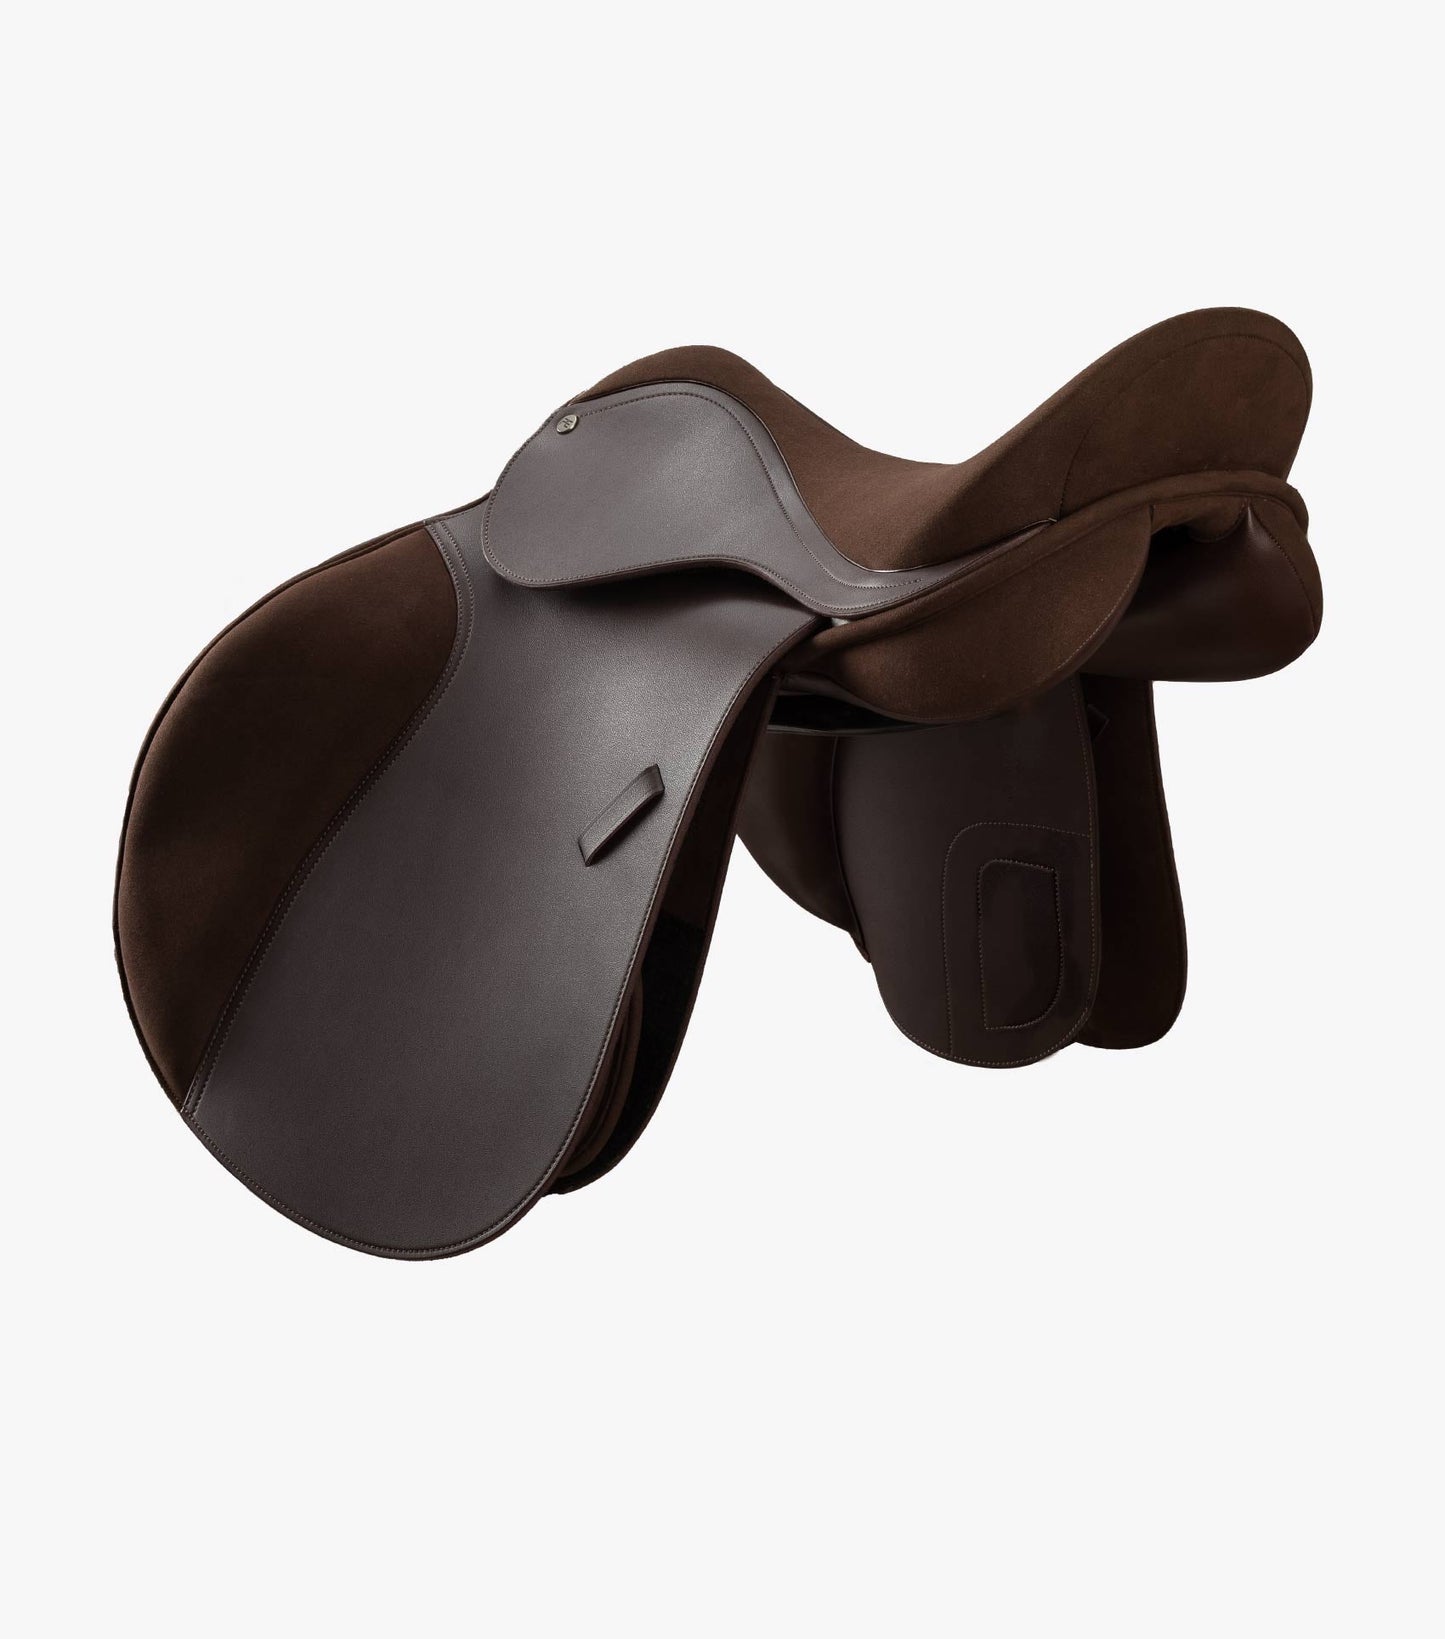 Premier Equine Synthetic Suede GP Saddle (Brown)